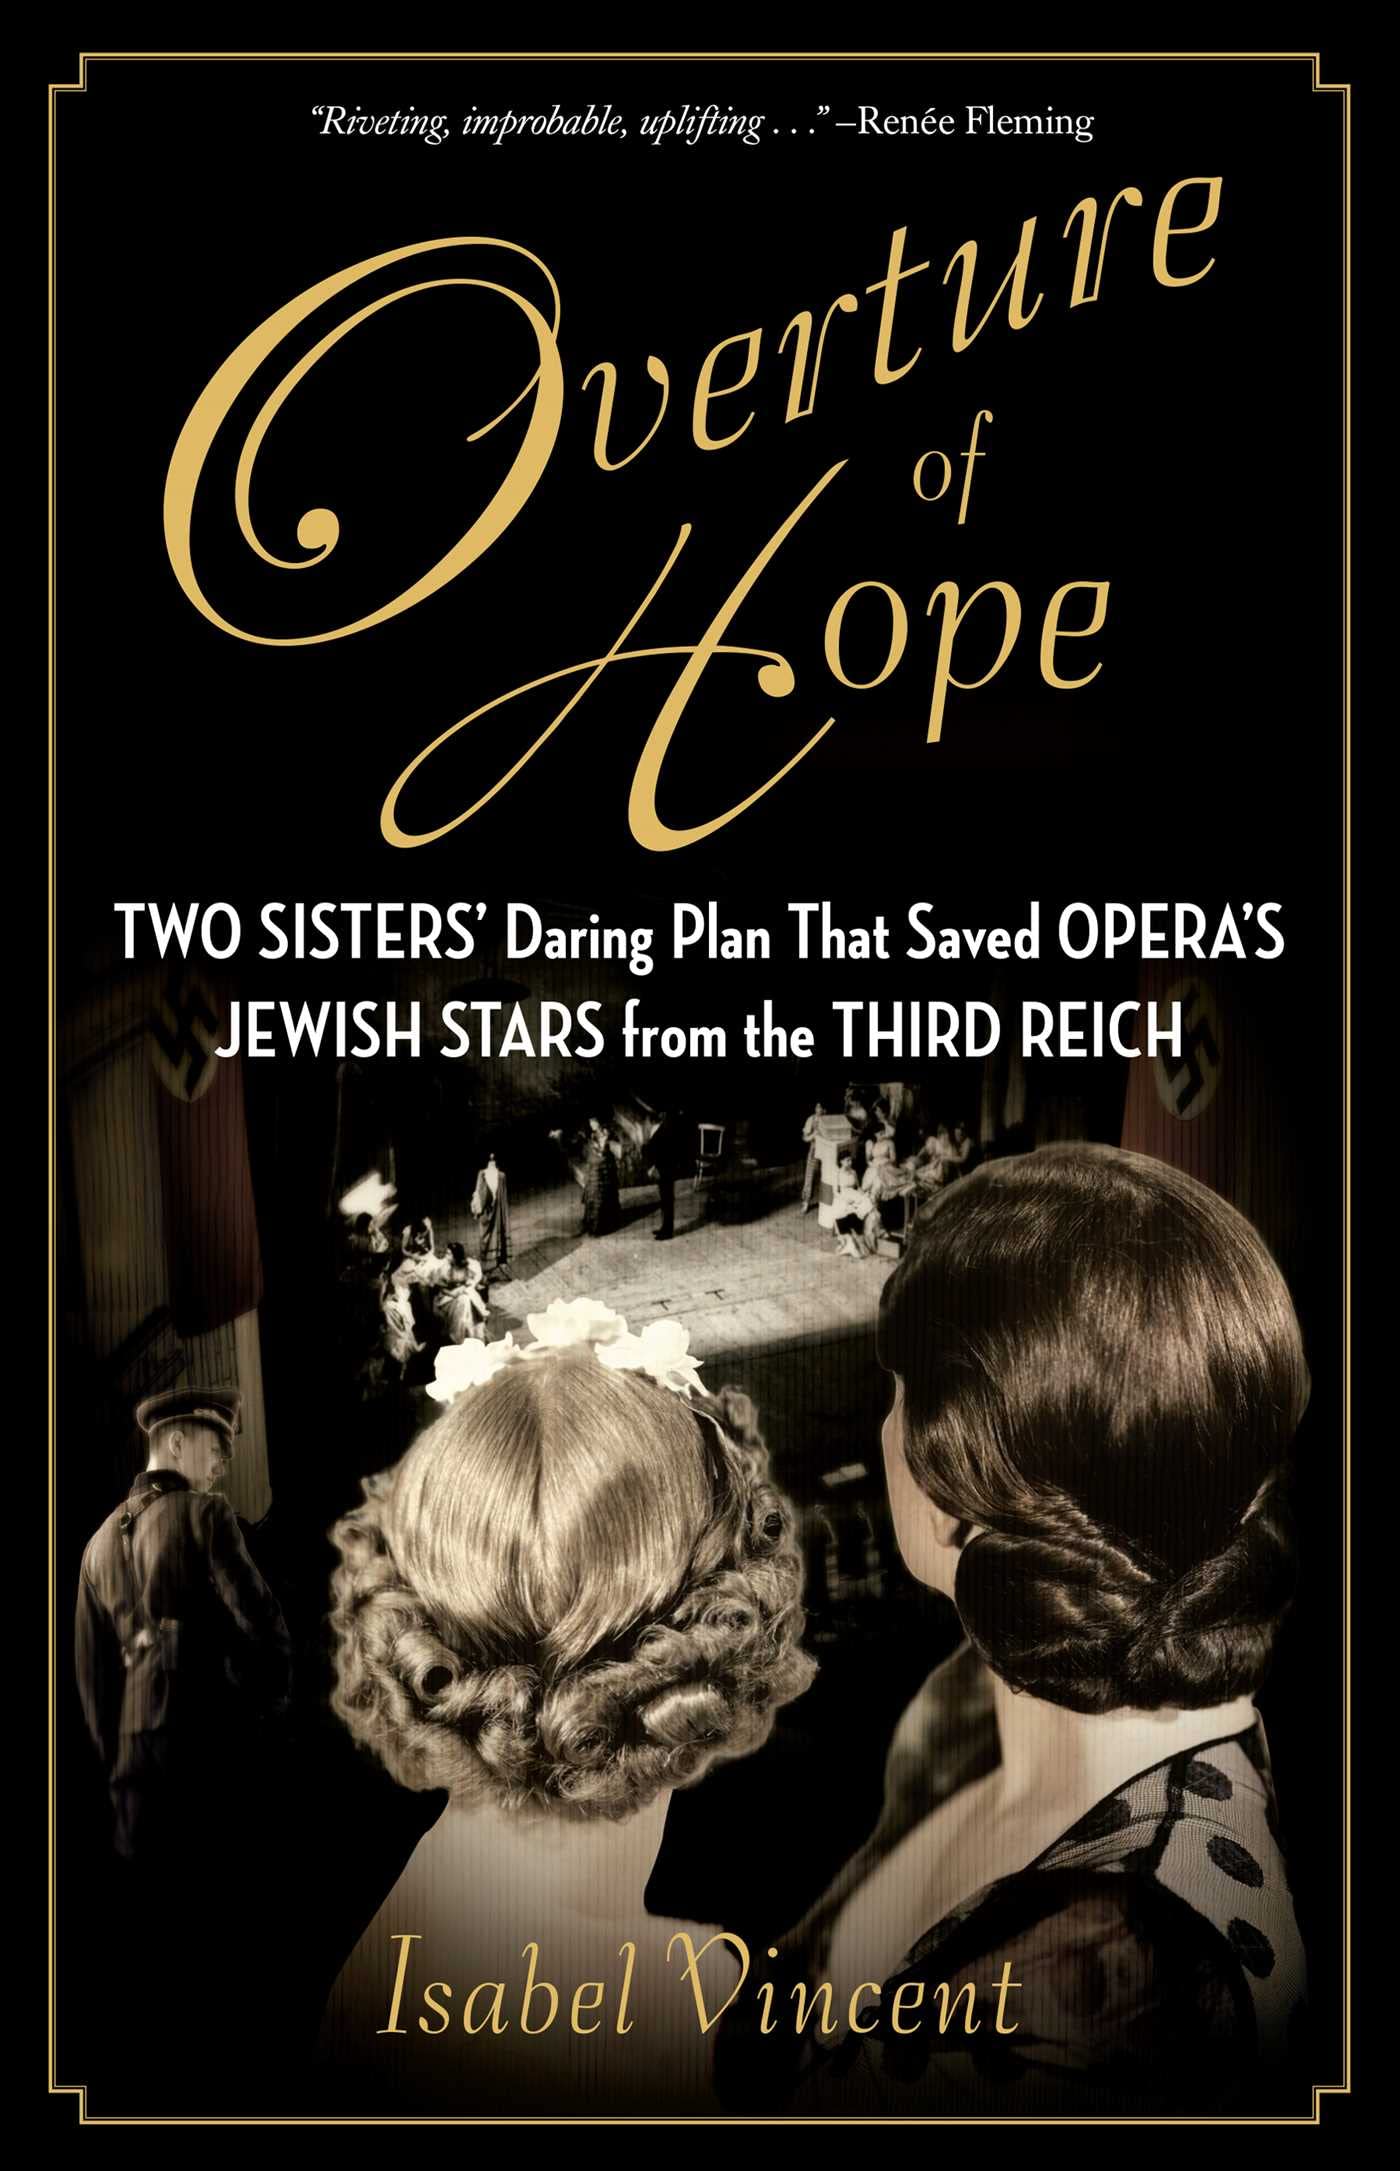 Overture of Hope Two Sisters’ Daring Plan